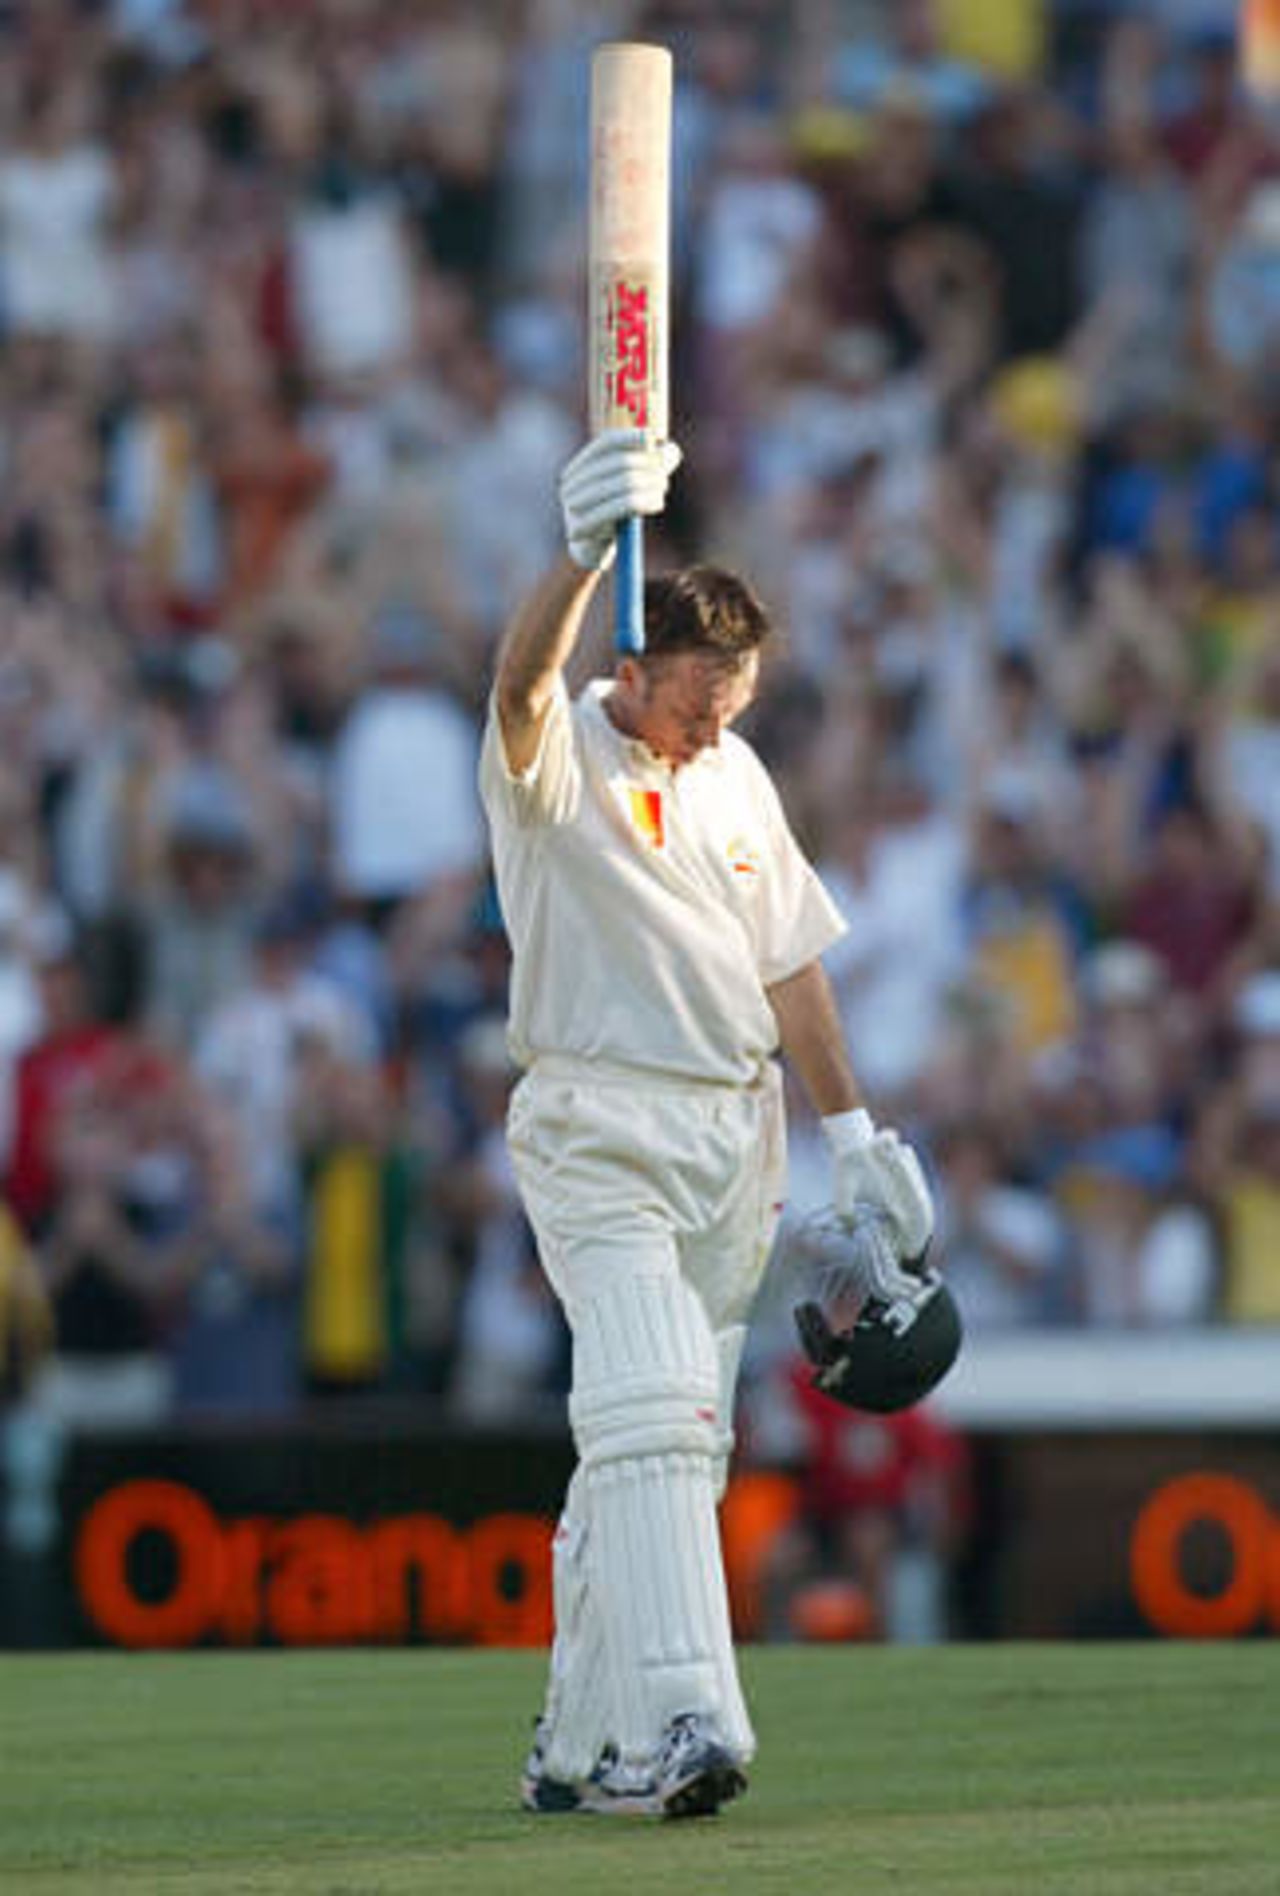 SYDNEY - JANUARY 3: Steve Waugh celebrates his century during fifth Ashes cricket Test against England in Sydney, Australia on January 3, 2003.